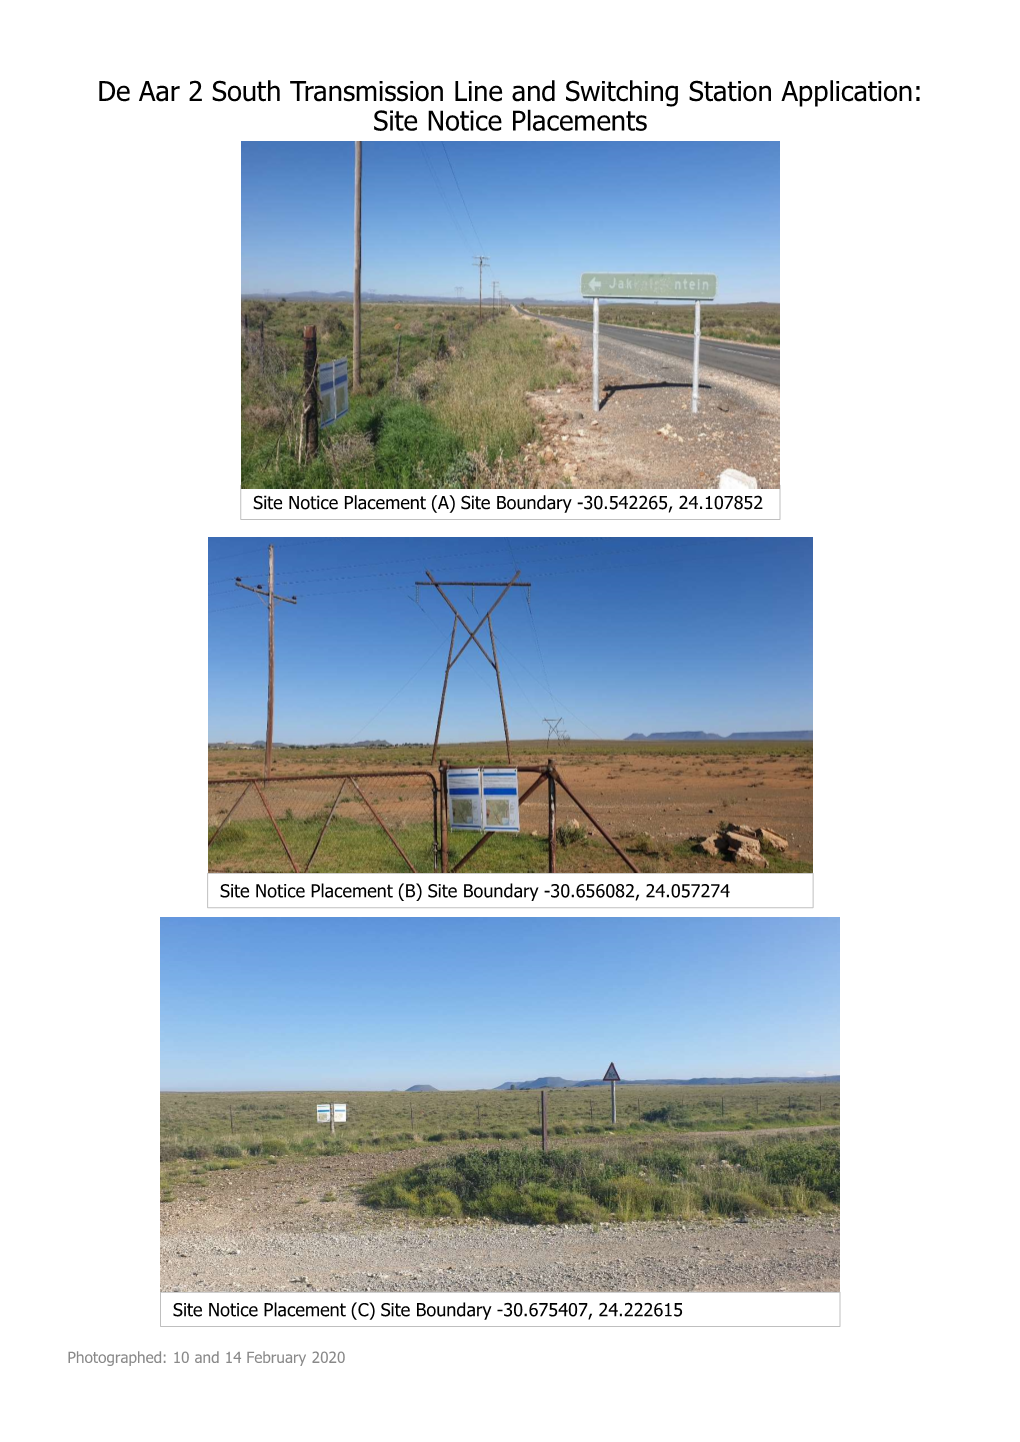 De Aar 2 South Transmission Line and Switching Station Application: Site Notice Placements